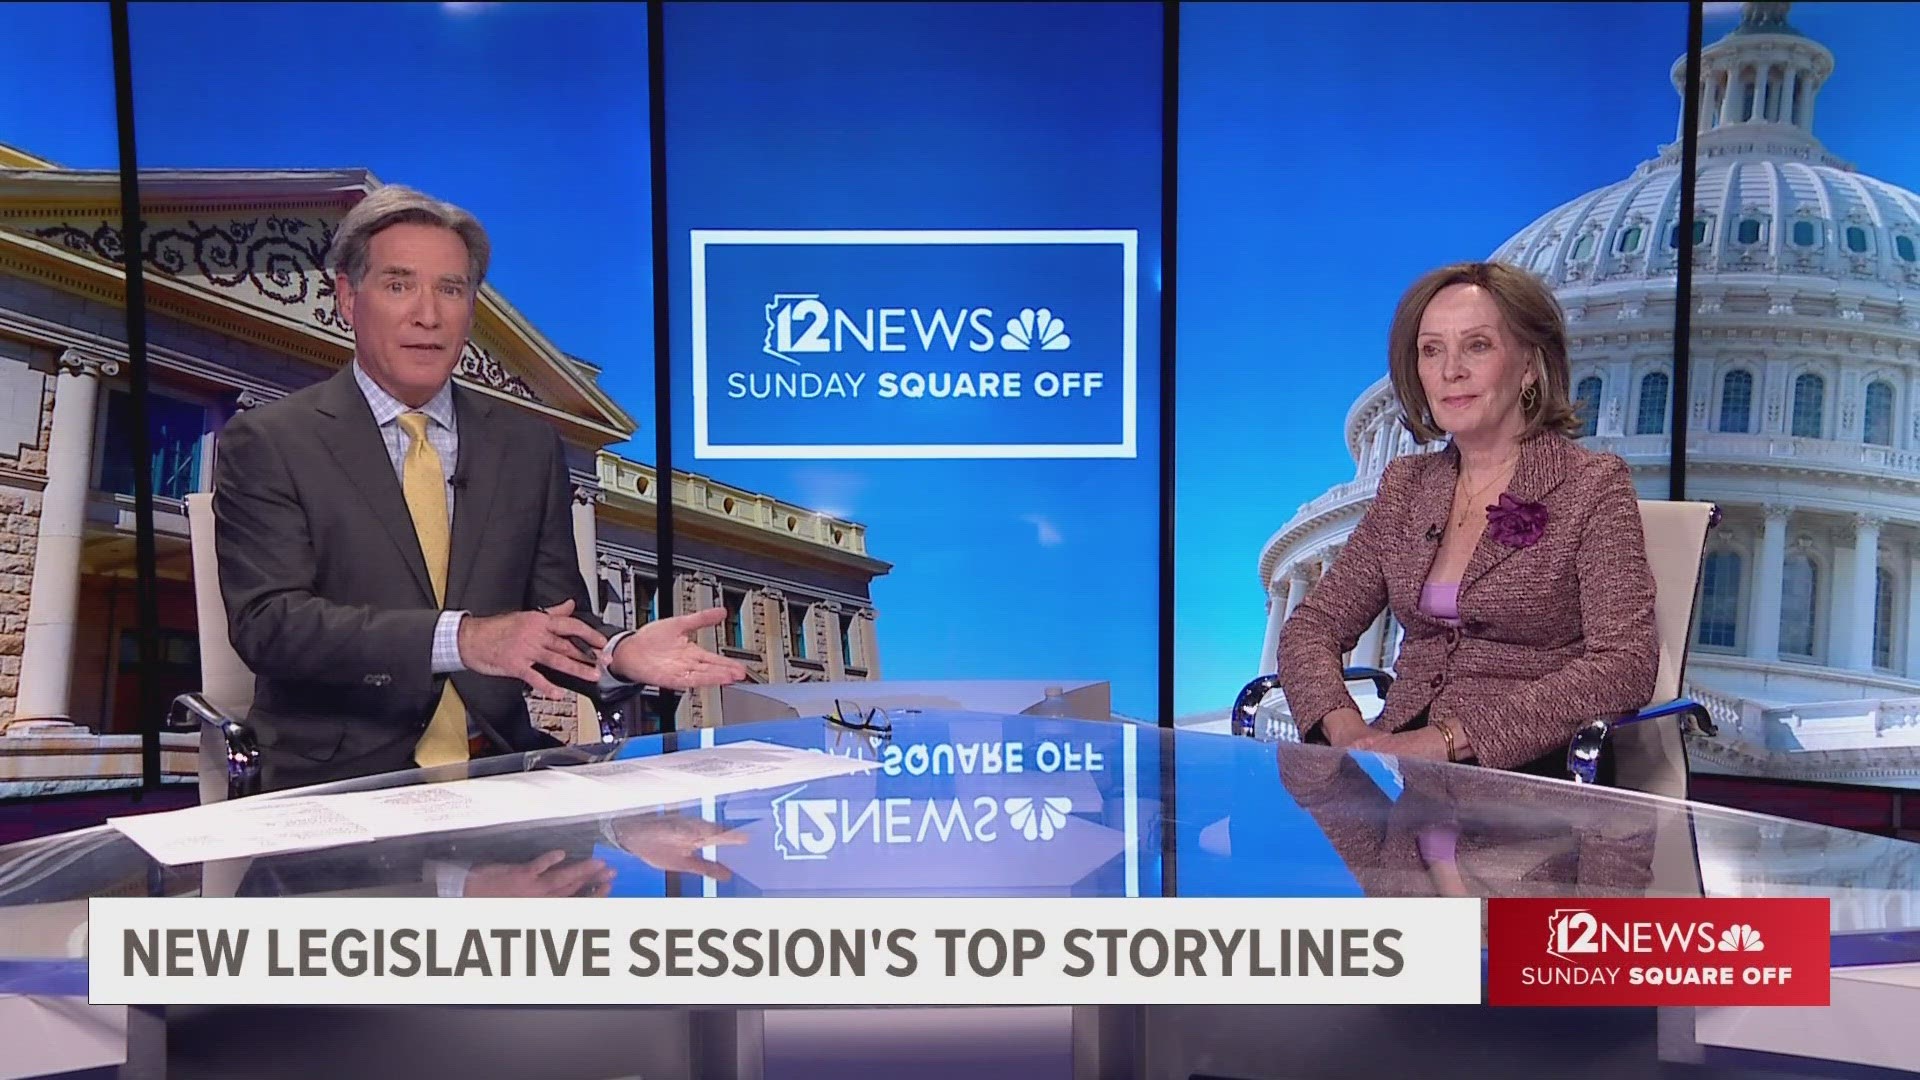 The Arizona Republic's Mary Jo Pitzl and "Sunday Square Off" moderator Brahm Resnik discuss the top storylines in the new session of the Arizona Legislature